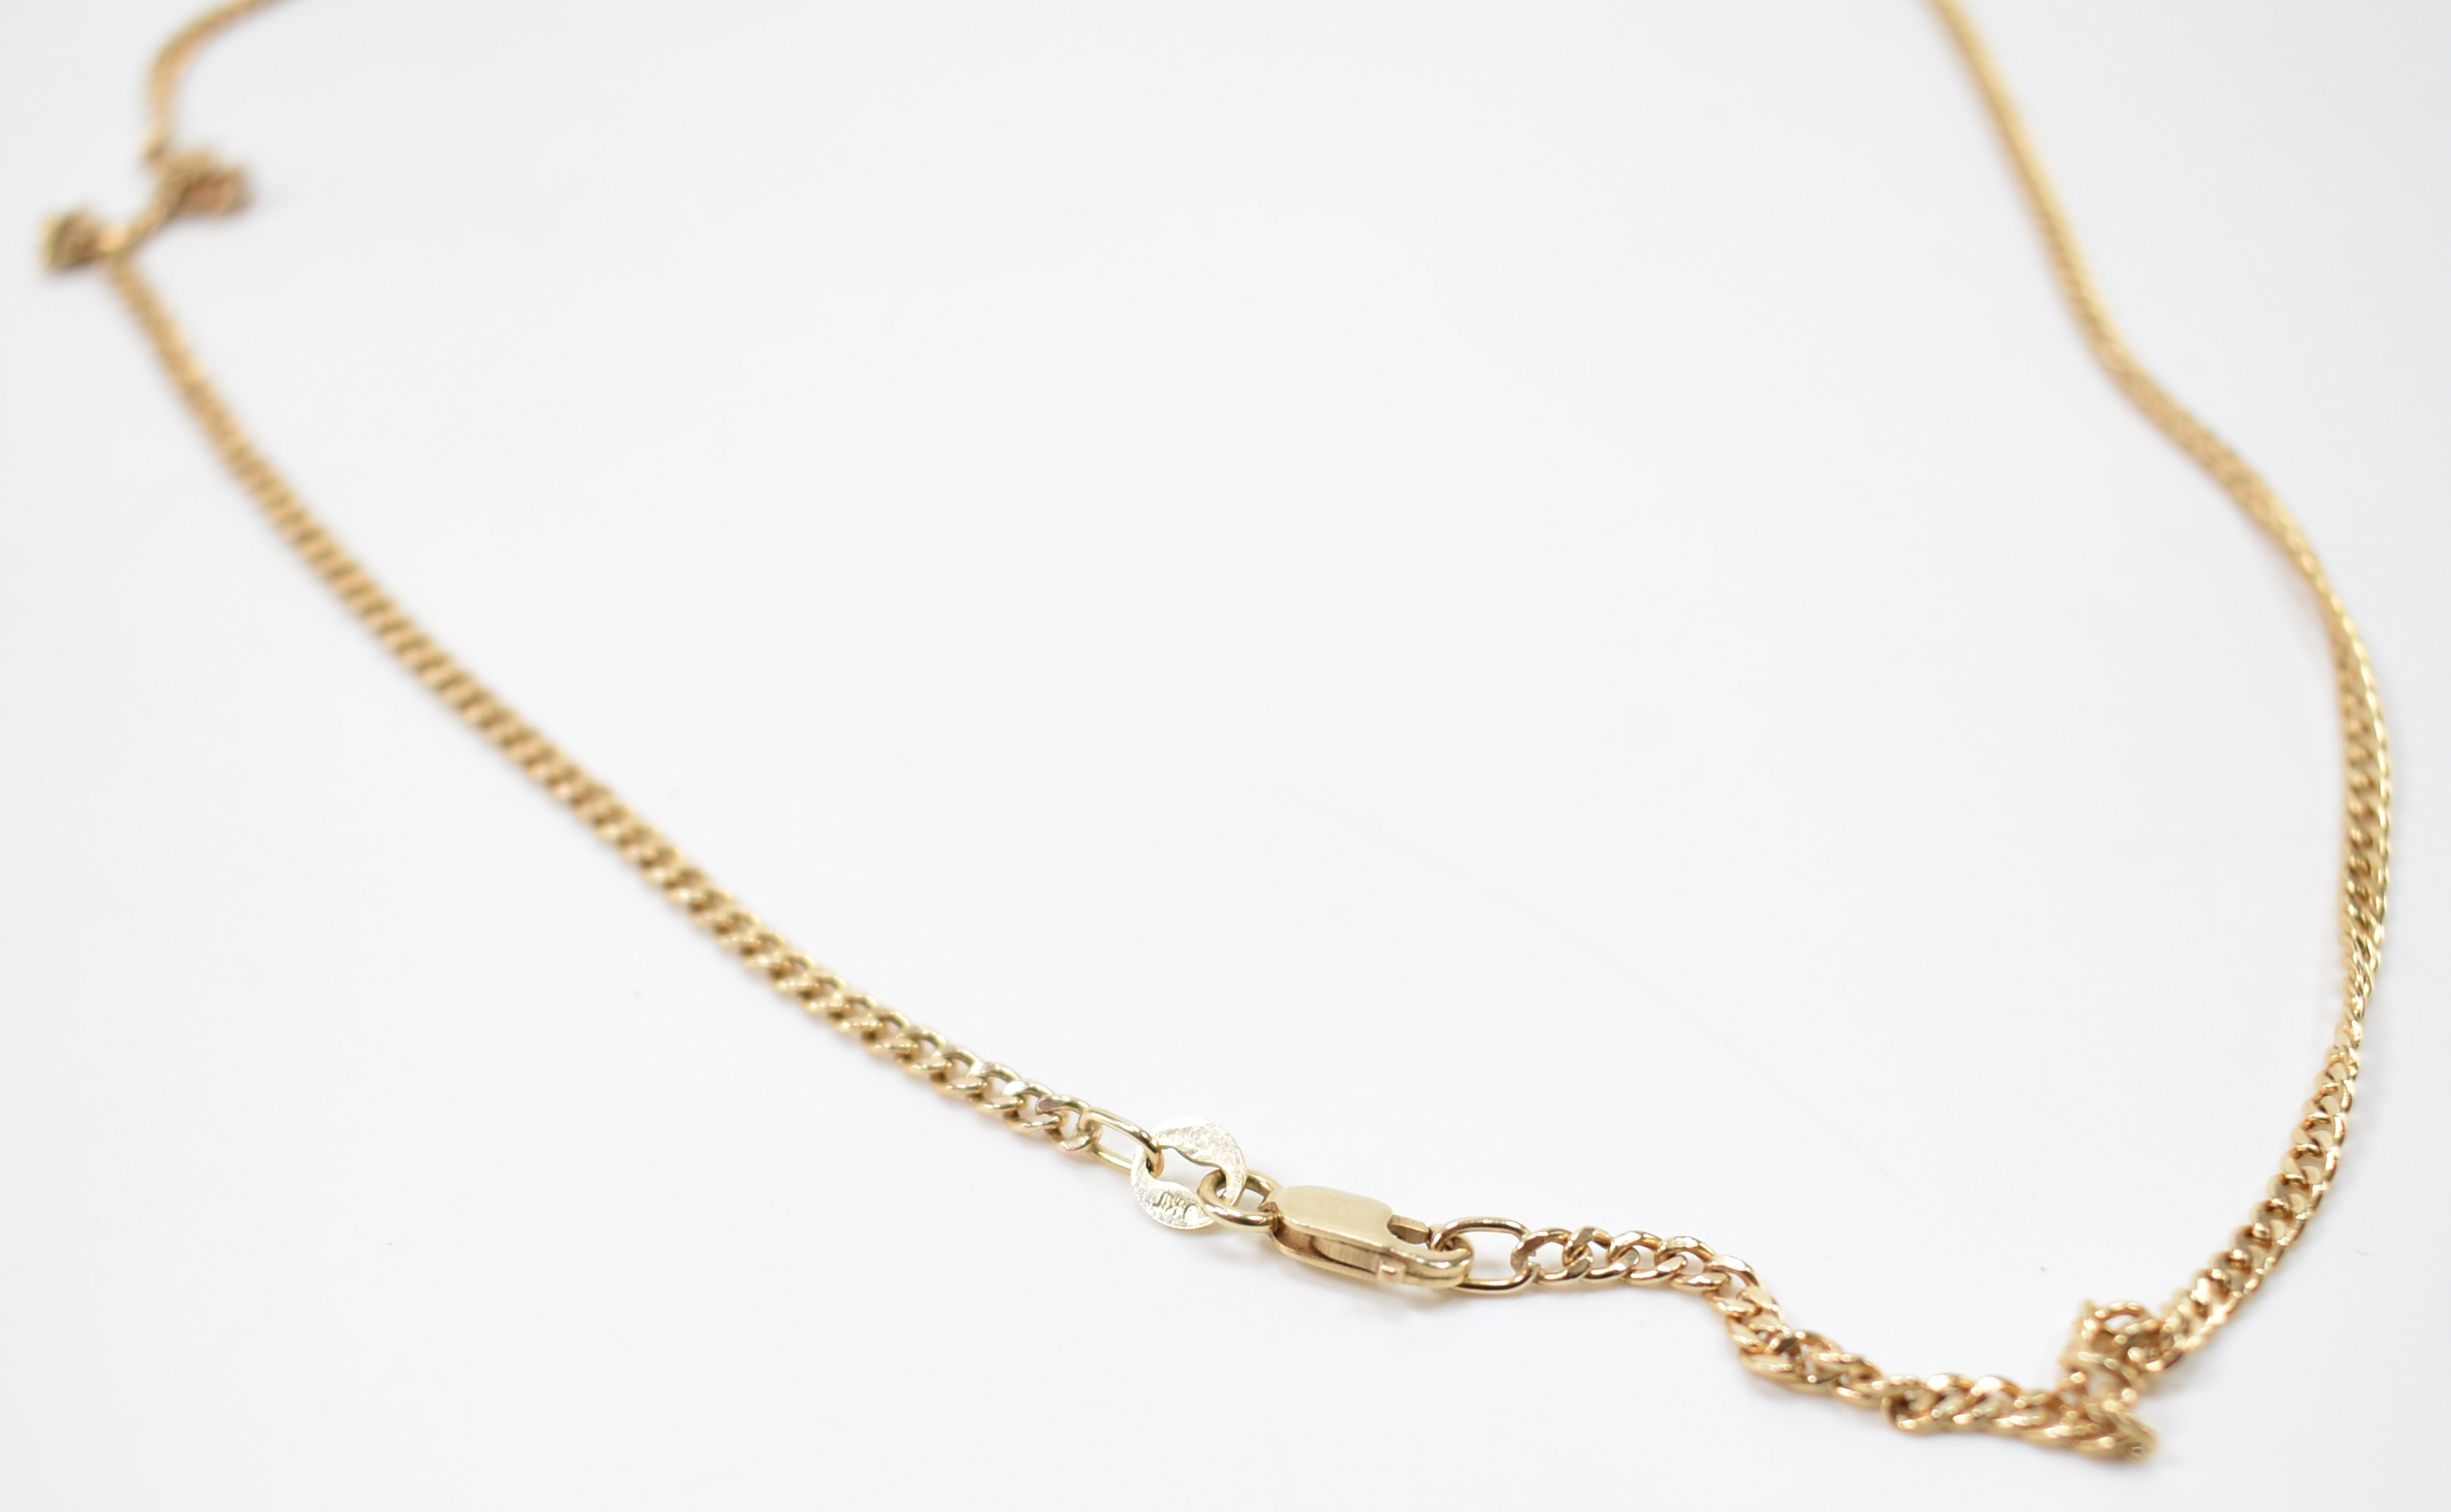 HALLMARKED 9CT GOLD FINE LINK NECKLACE CHAIN - Image 6 of 6